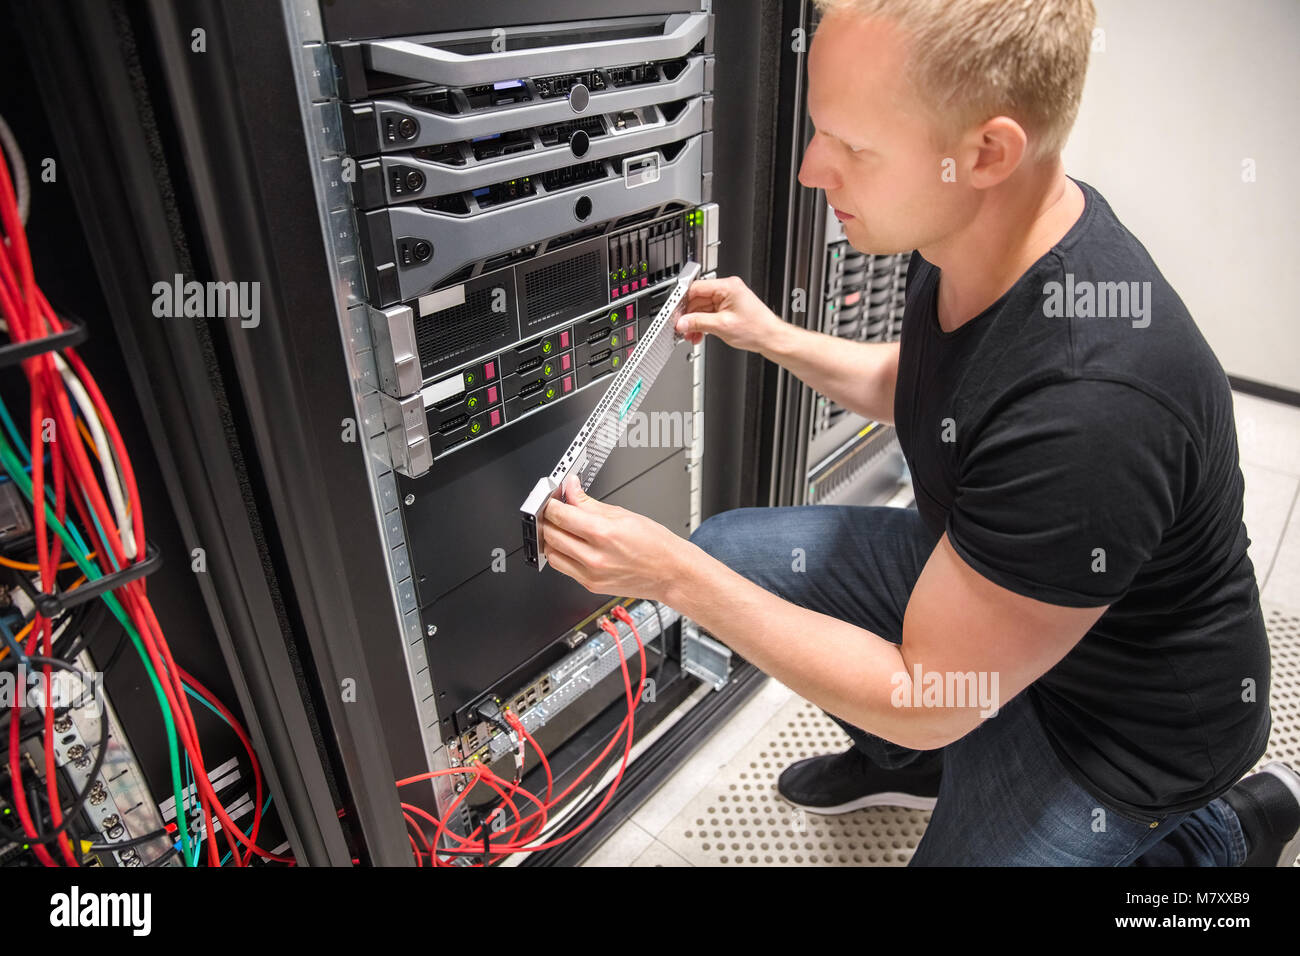 Engineer Checking Computer Server In Datacenter Stock Photo